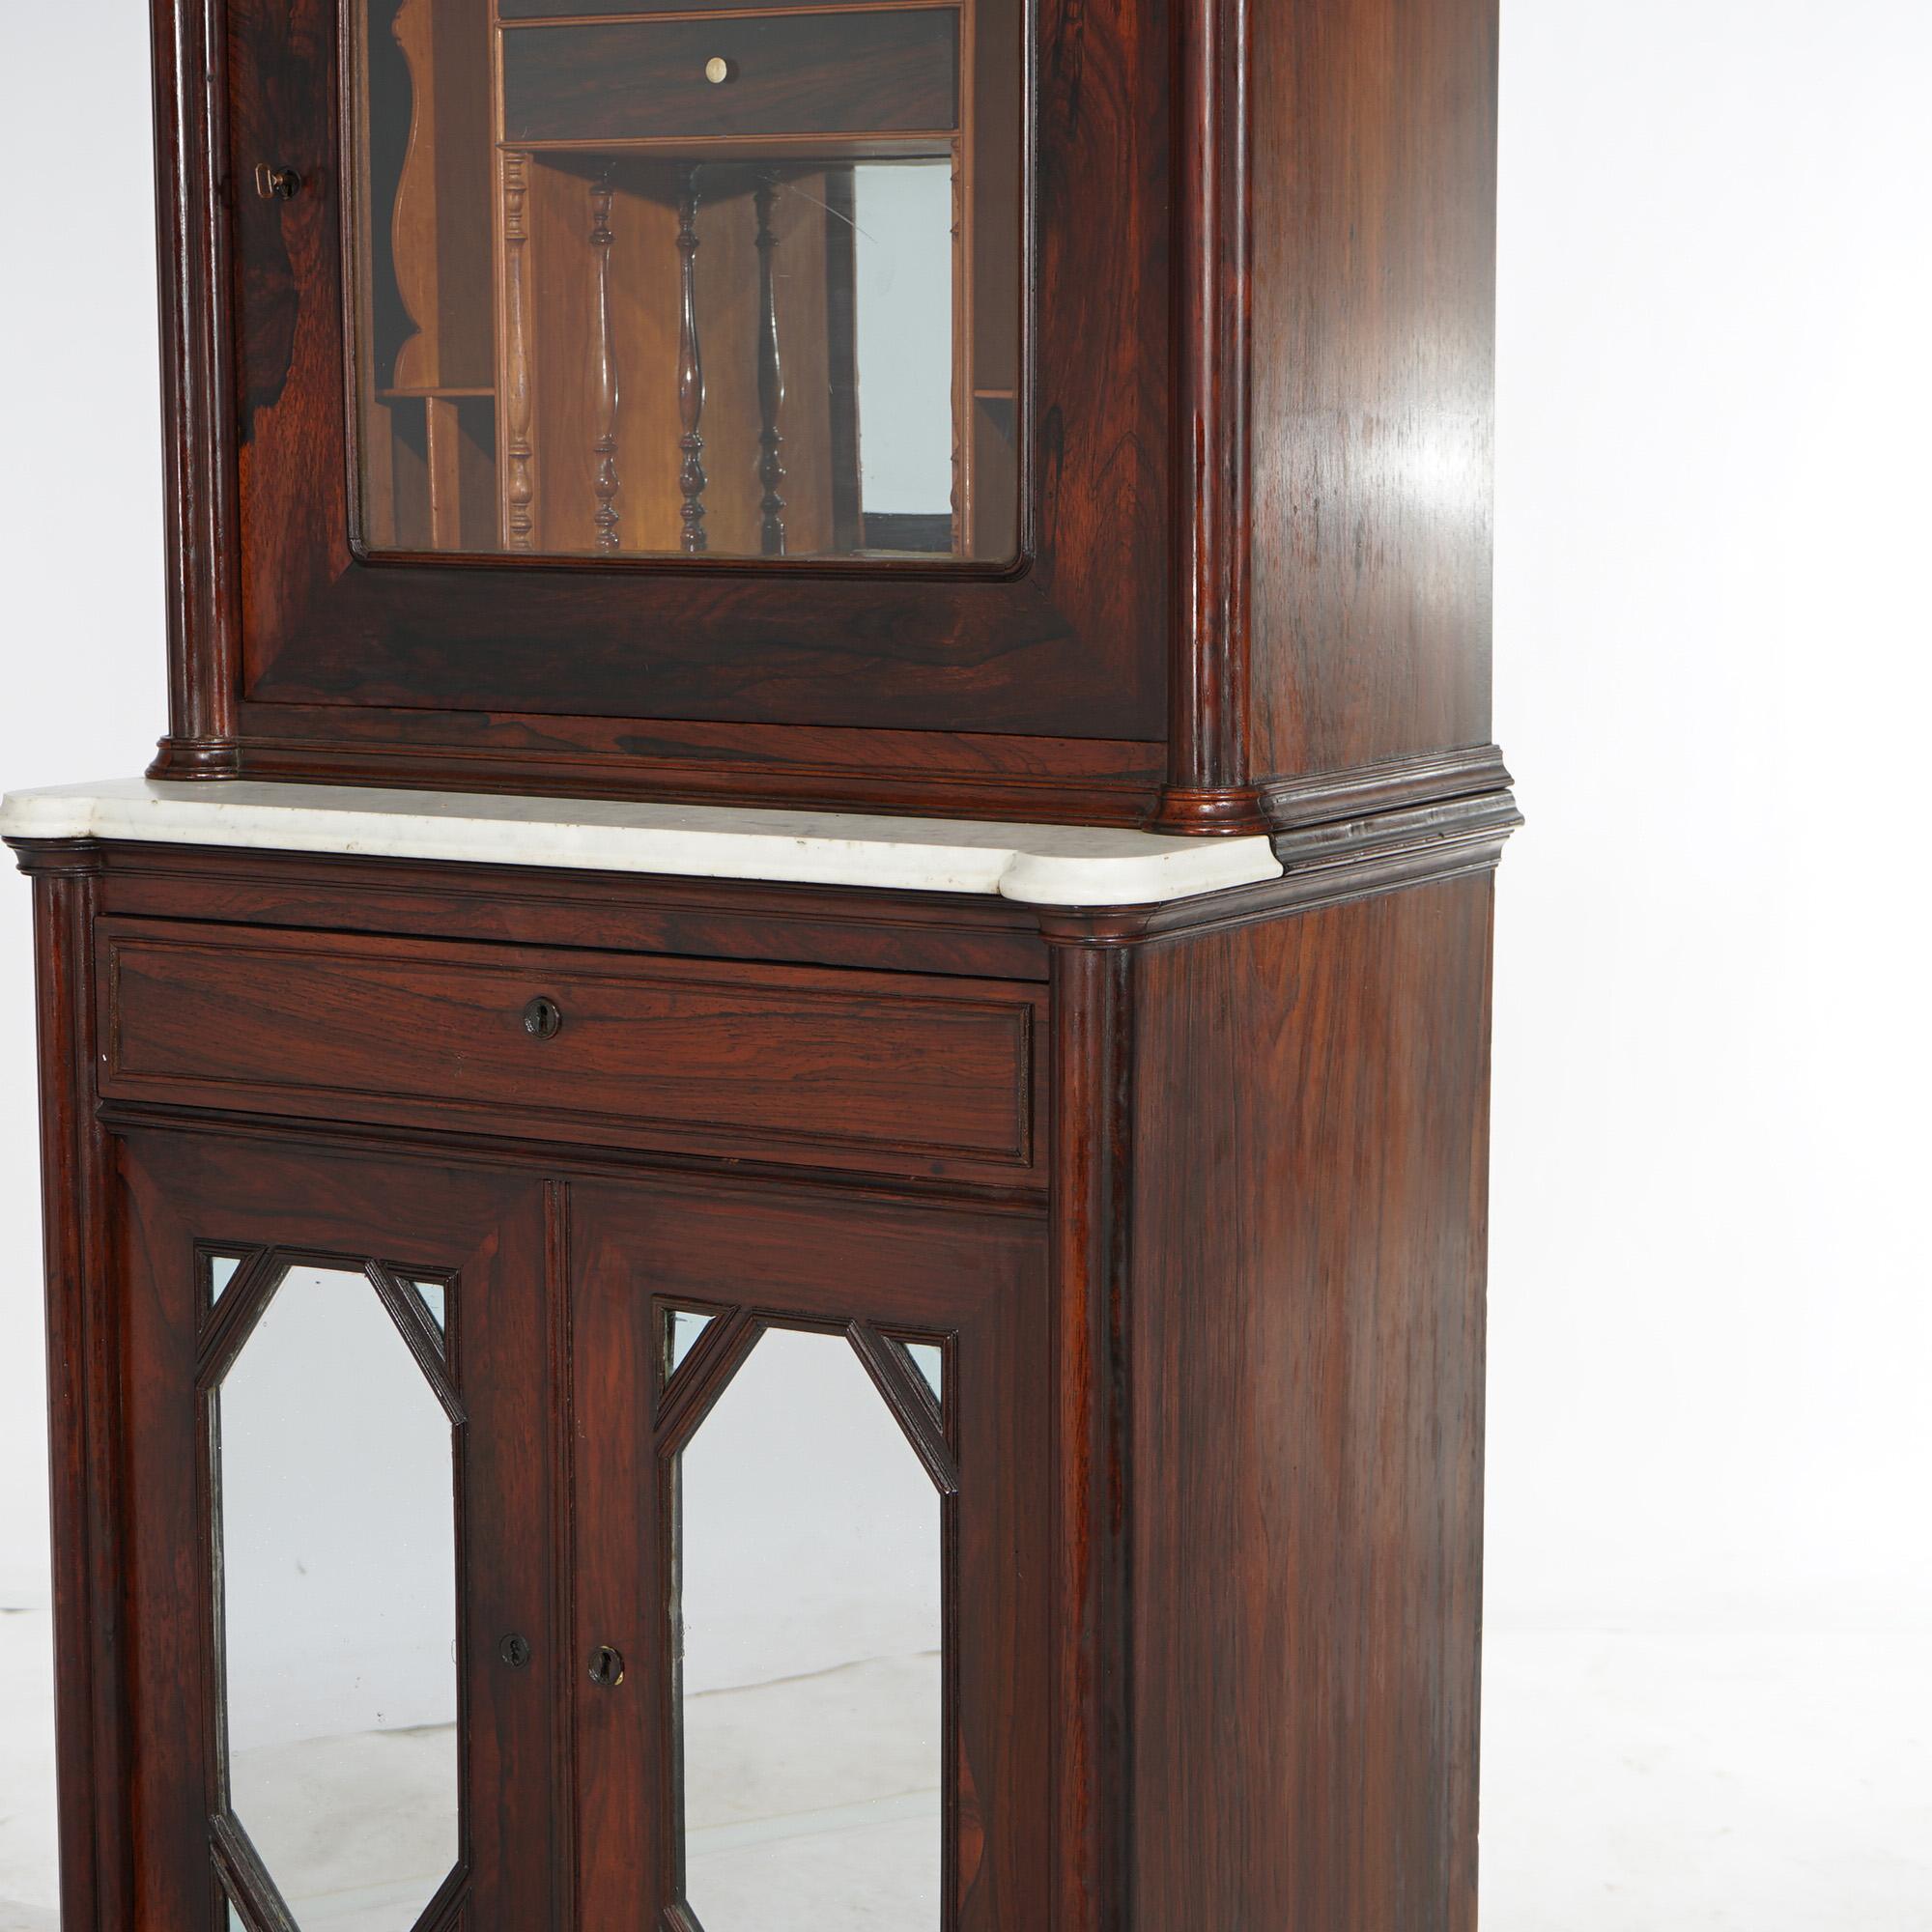 Antique Gothic Revival Victorian Rosewood & Marble Mirrored Secretary Desk C1850 For Sale 7